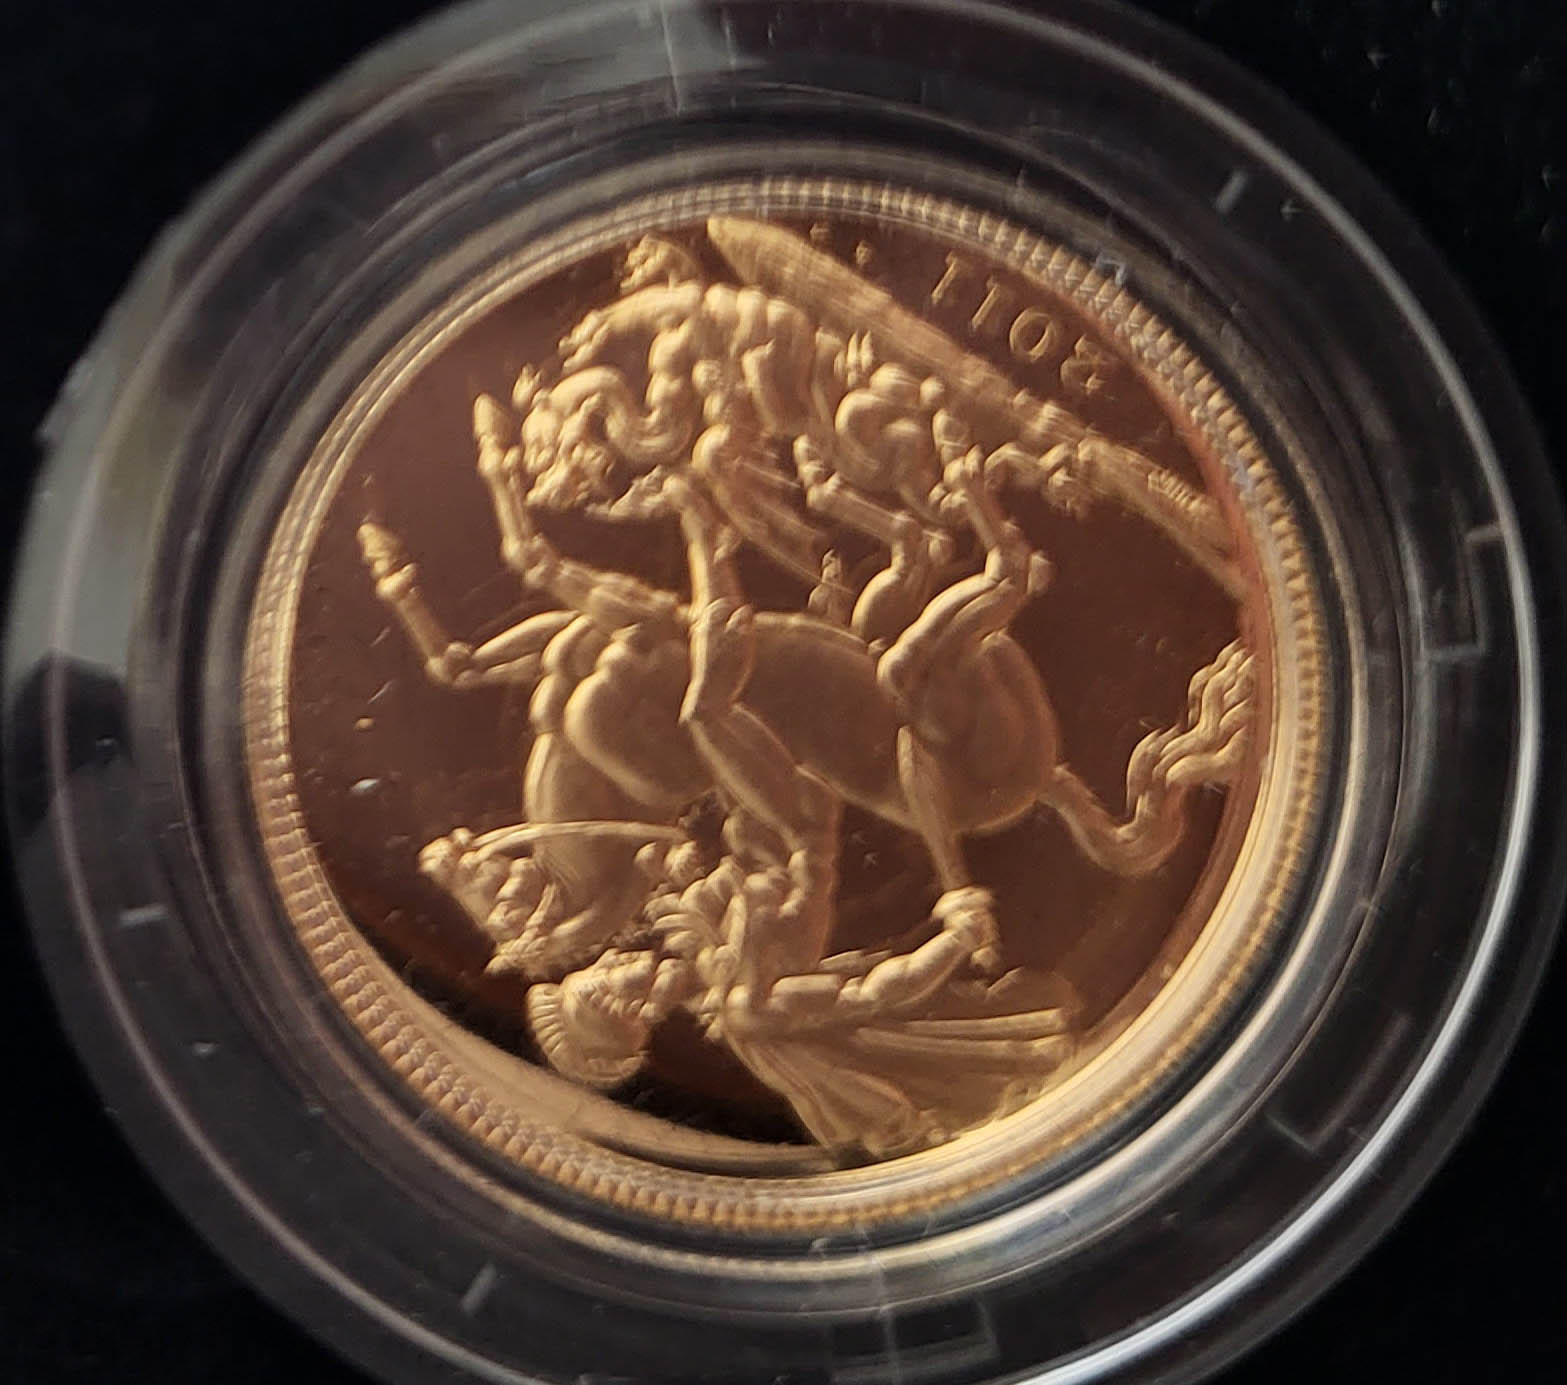 A 22CT GOLD FULL SOVEREIGN PROOF COIN, DATED 2011 With George and Dragon to reverse, in a protective - Image 2 of 5